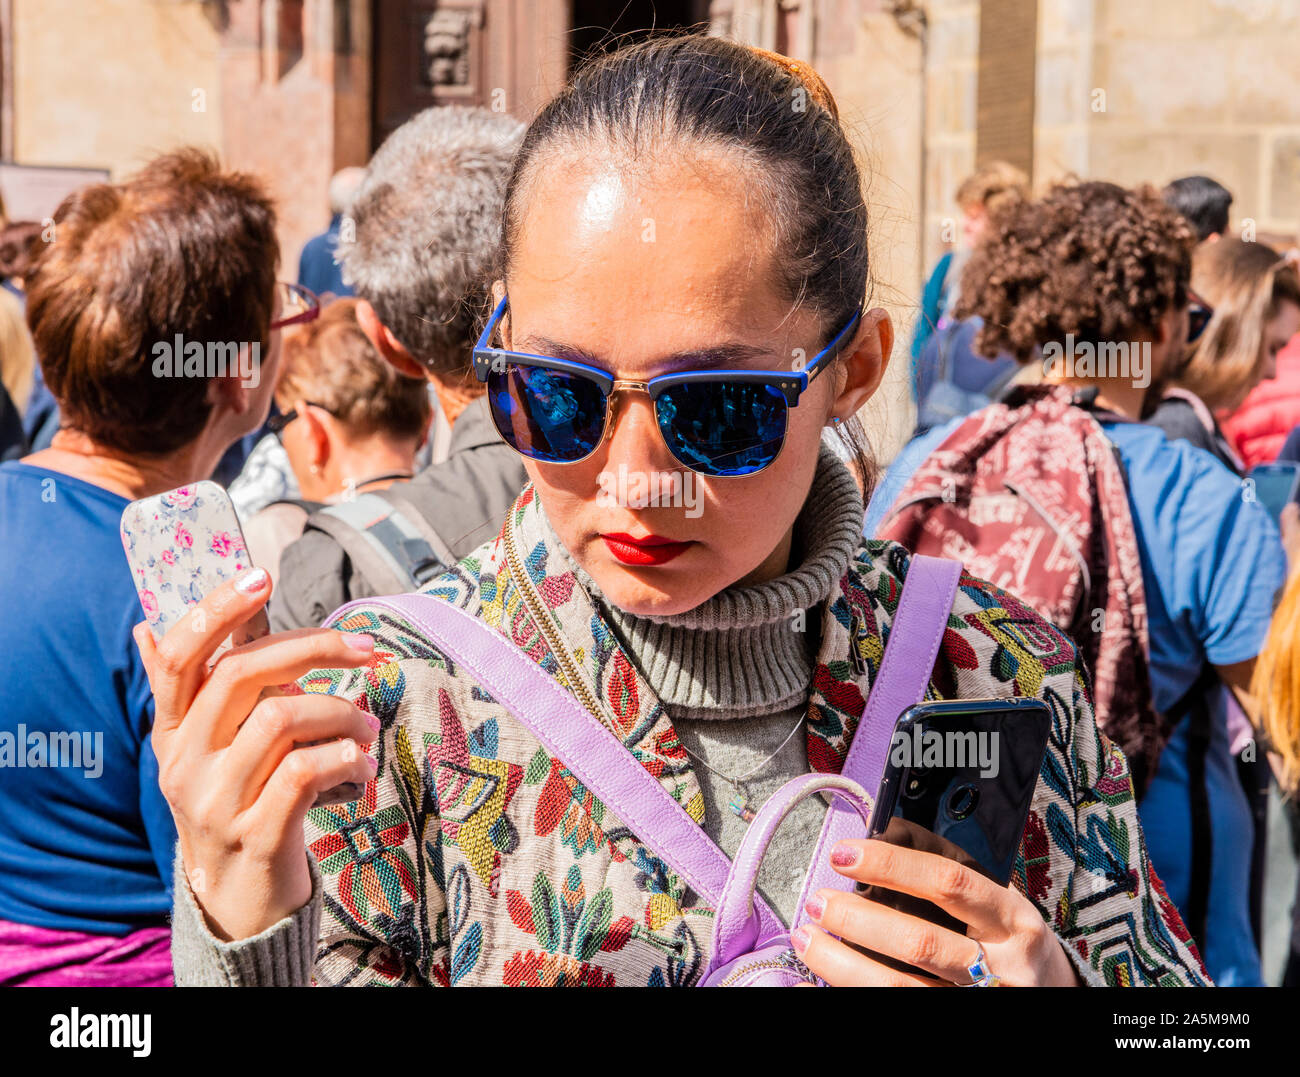 Tourist holding two smartphones, Old Town Square, Prague, Czech Republic Stock Photo